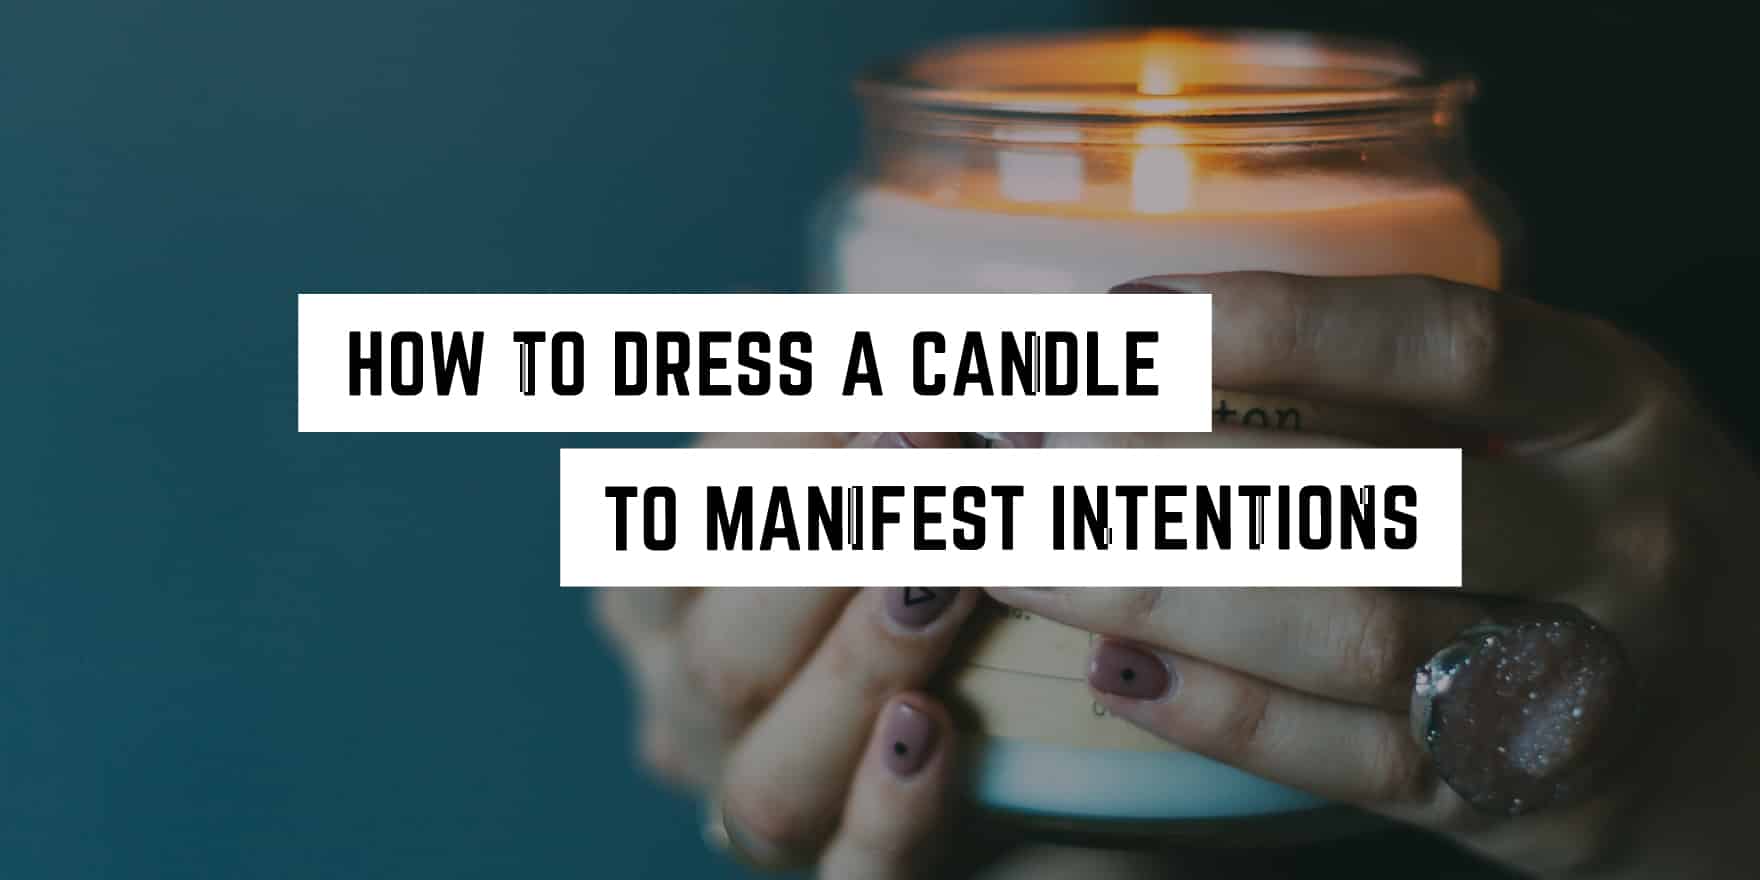 How to Dress a Candle to Manifest intentions